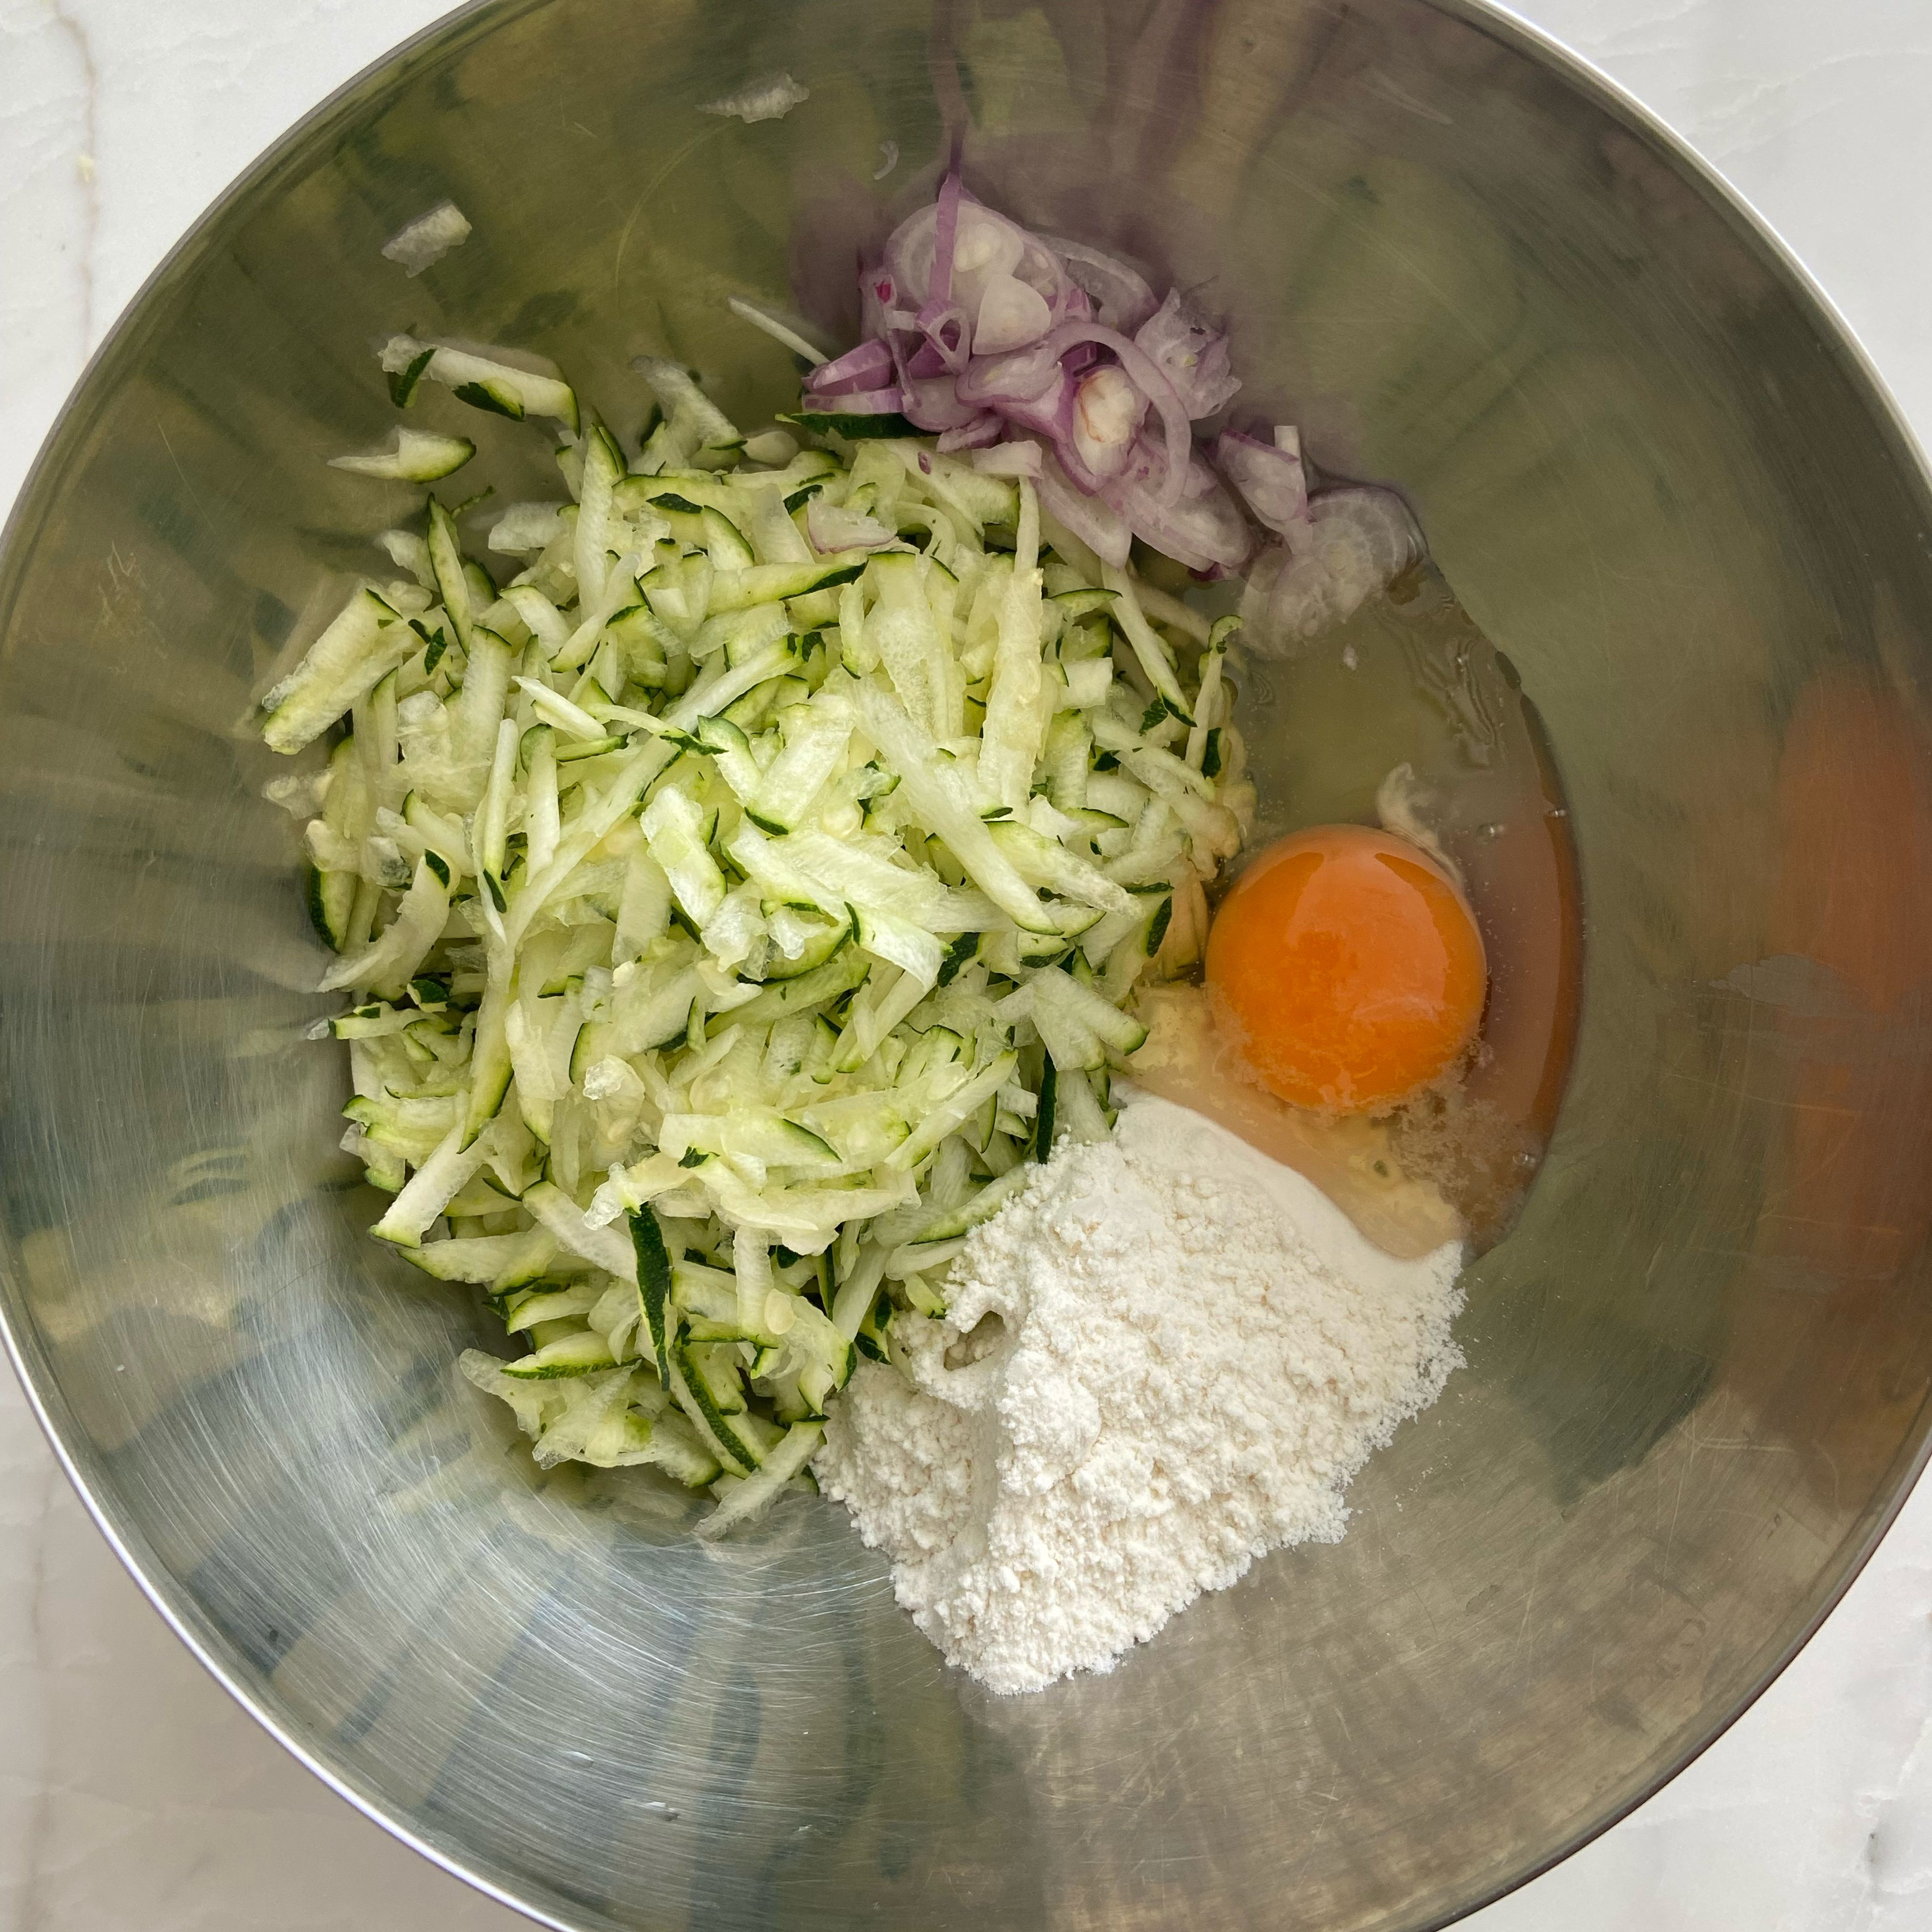 In a large mixing bowl, Add grated zucchini, flour, egg, onions and season with salt and black pepper